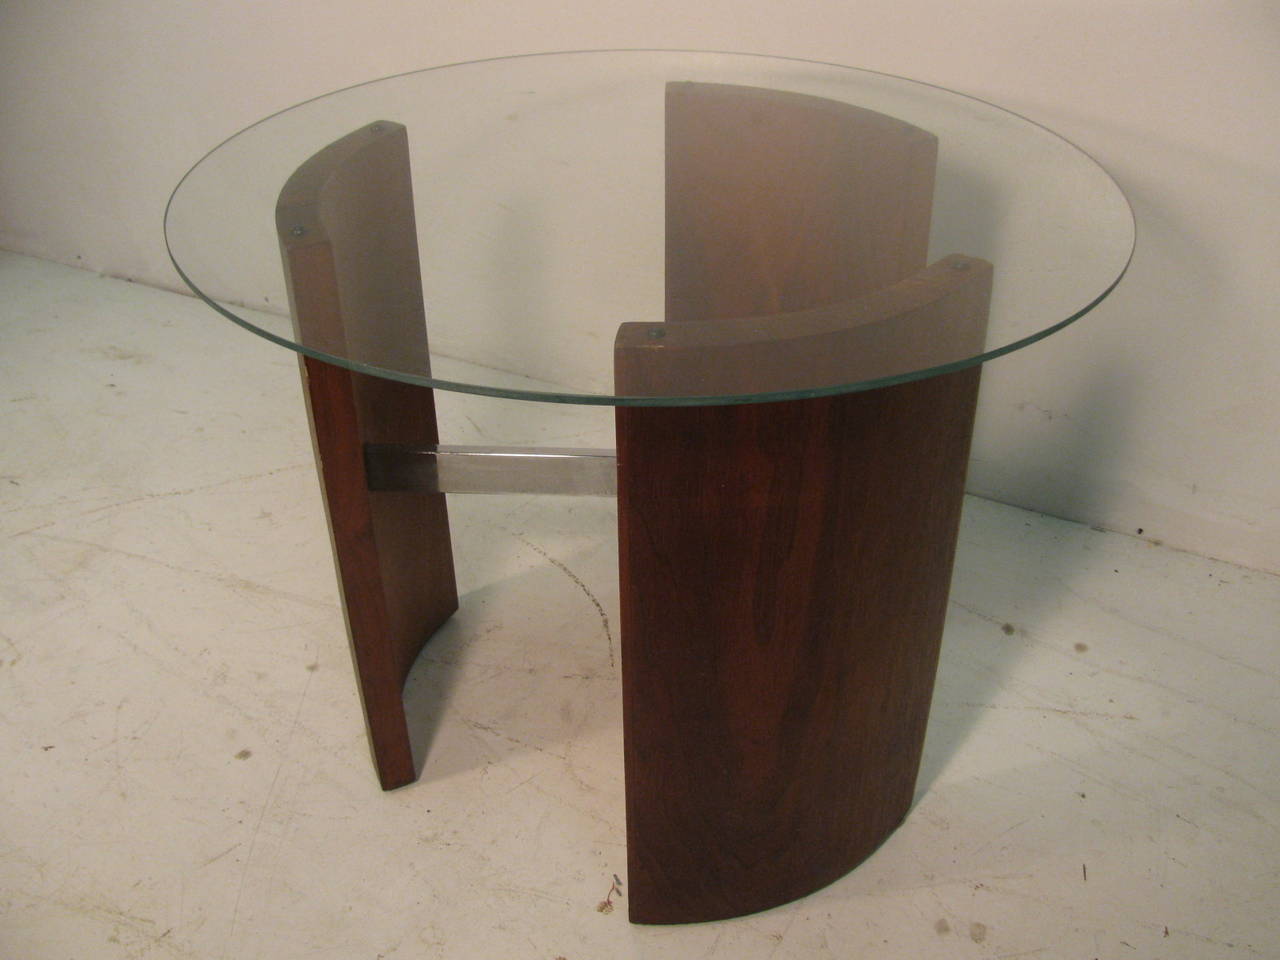 Beautiful and simple in its design. Three curved slabs connected by a nickel chrome spoke. Can handle a larger piece of glass. Base without the glass is 19.5 in diameter.